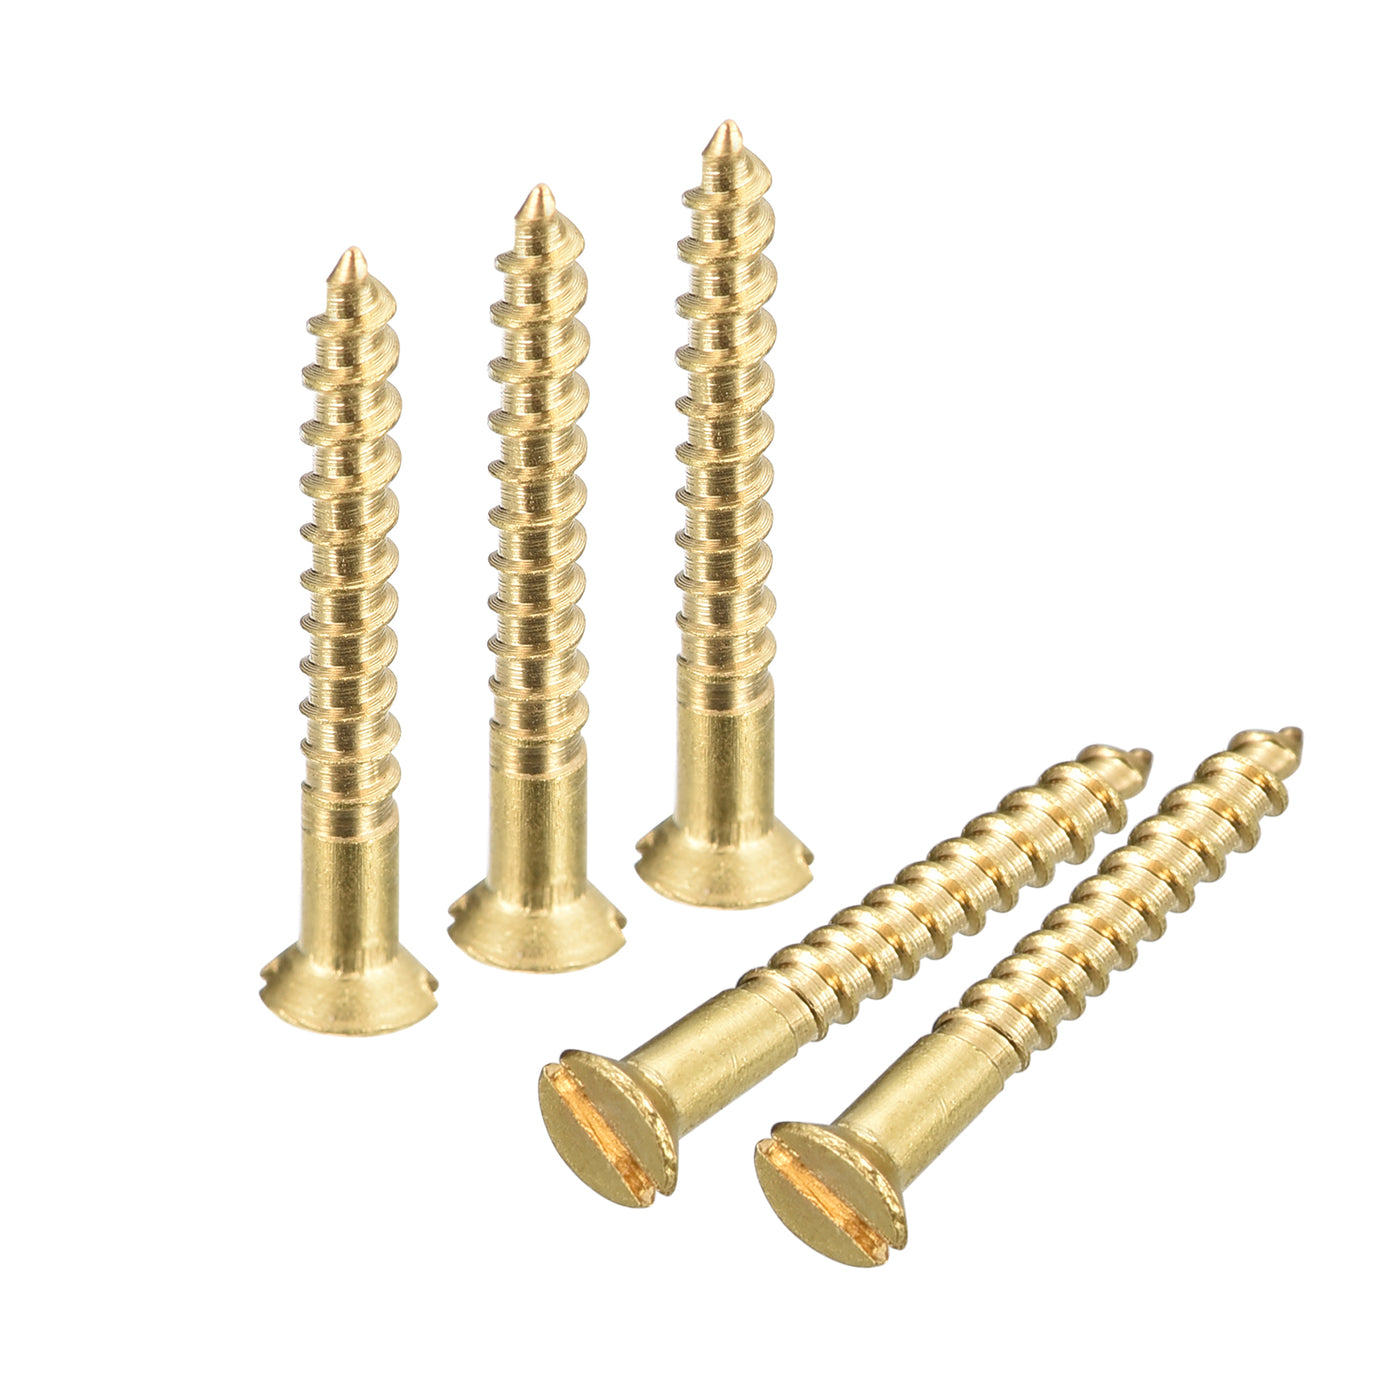 uxcell Uxcell 100Pcs M2 x 16mm Brass Slotted Drive Flat Head Wood Screws Self Tapping Screw